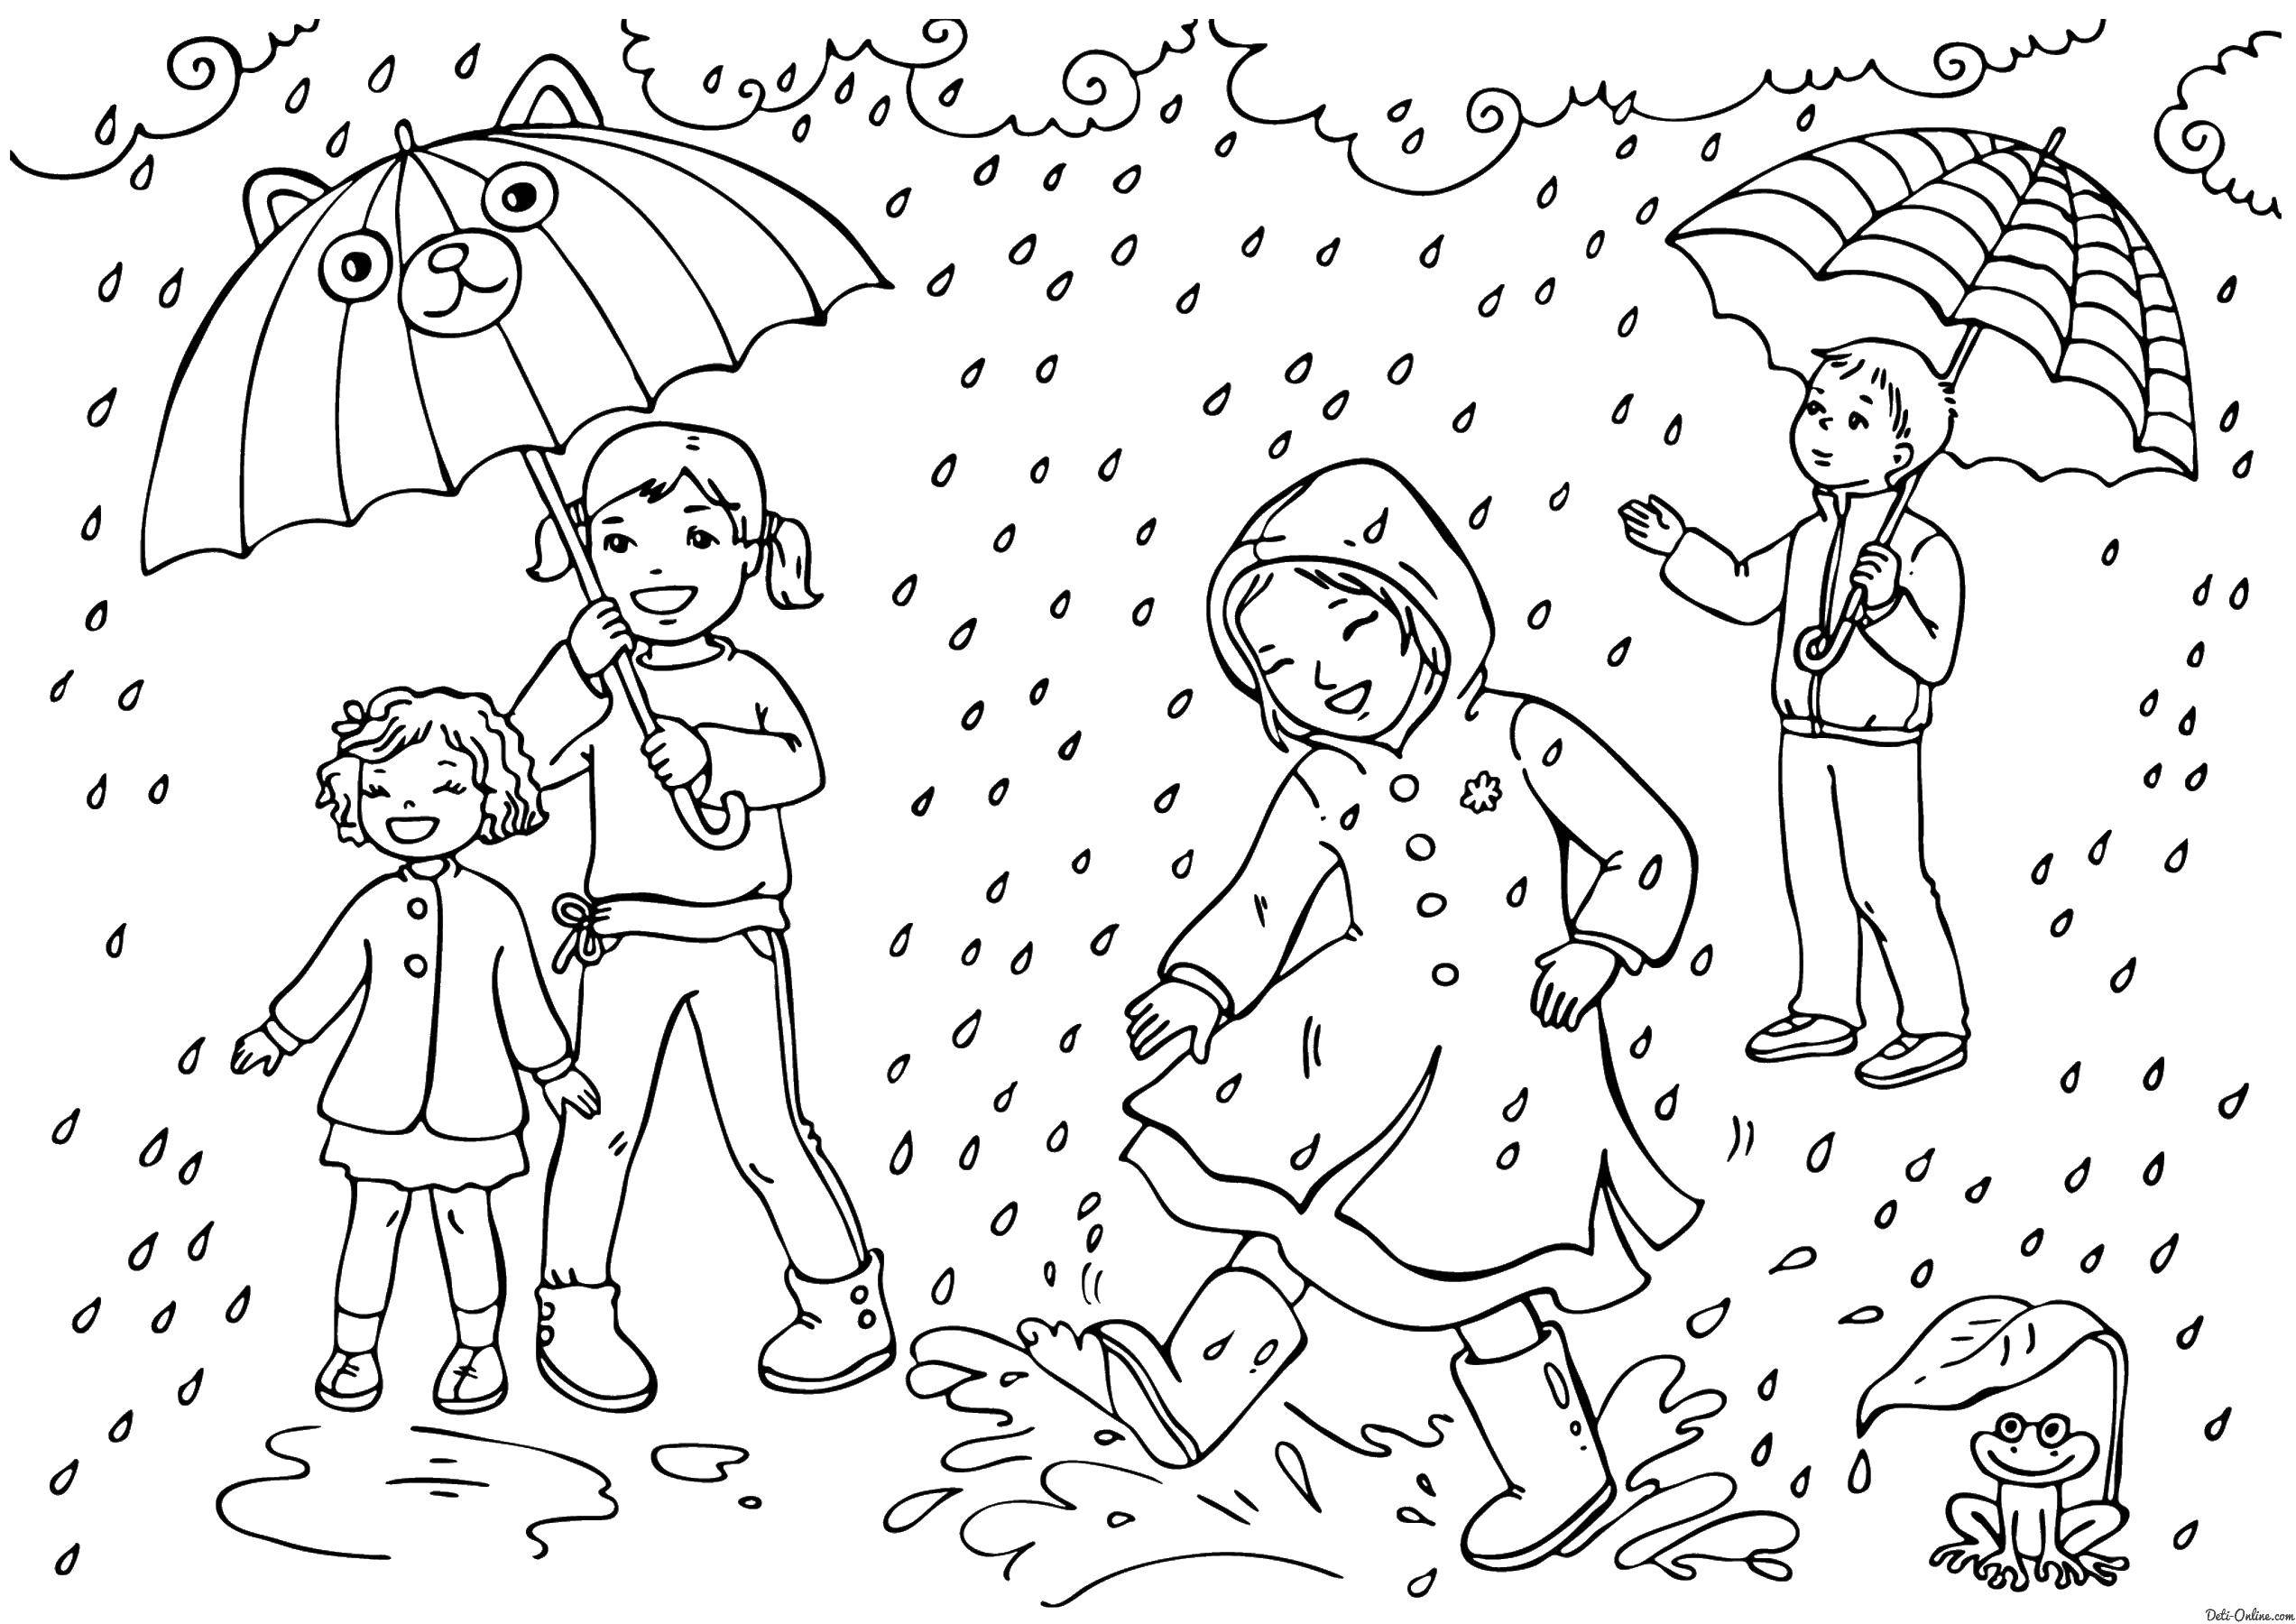 Coloring Children walk in the rain. Category People. Tags:  children, rain.